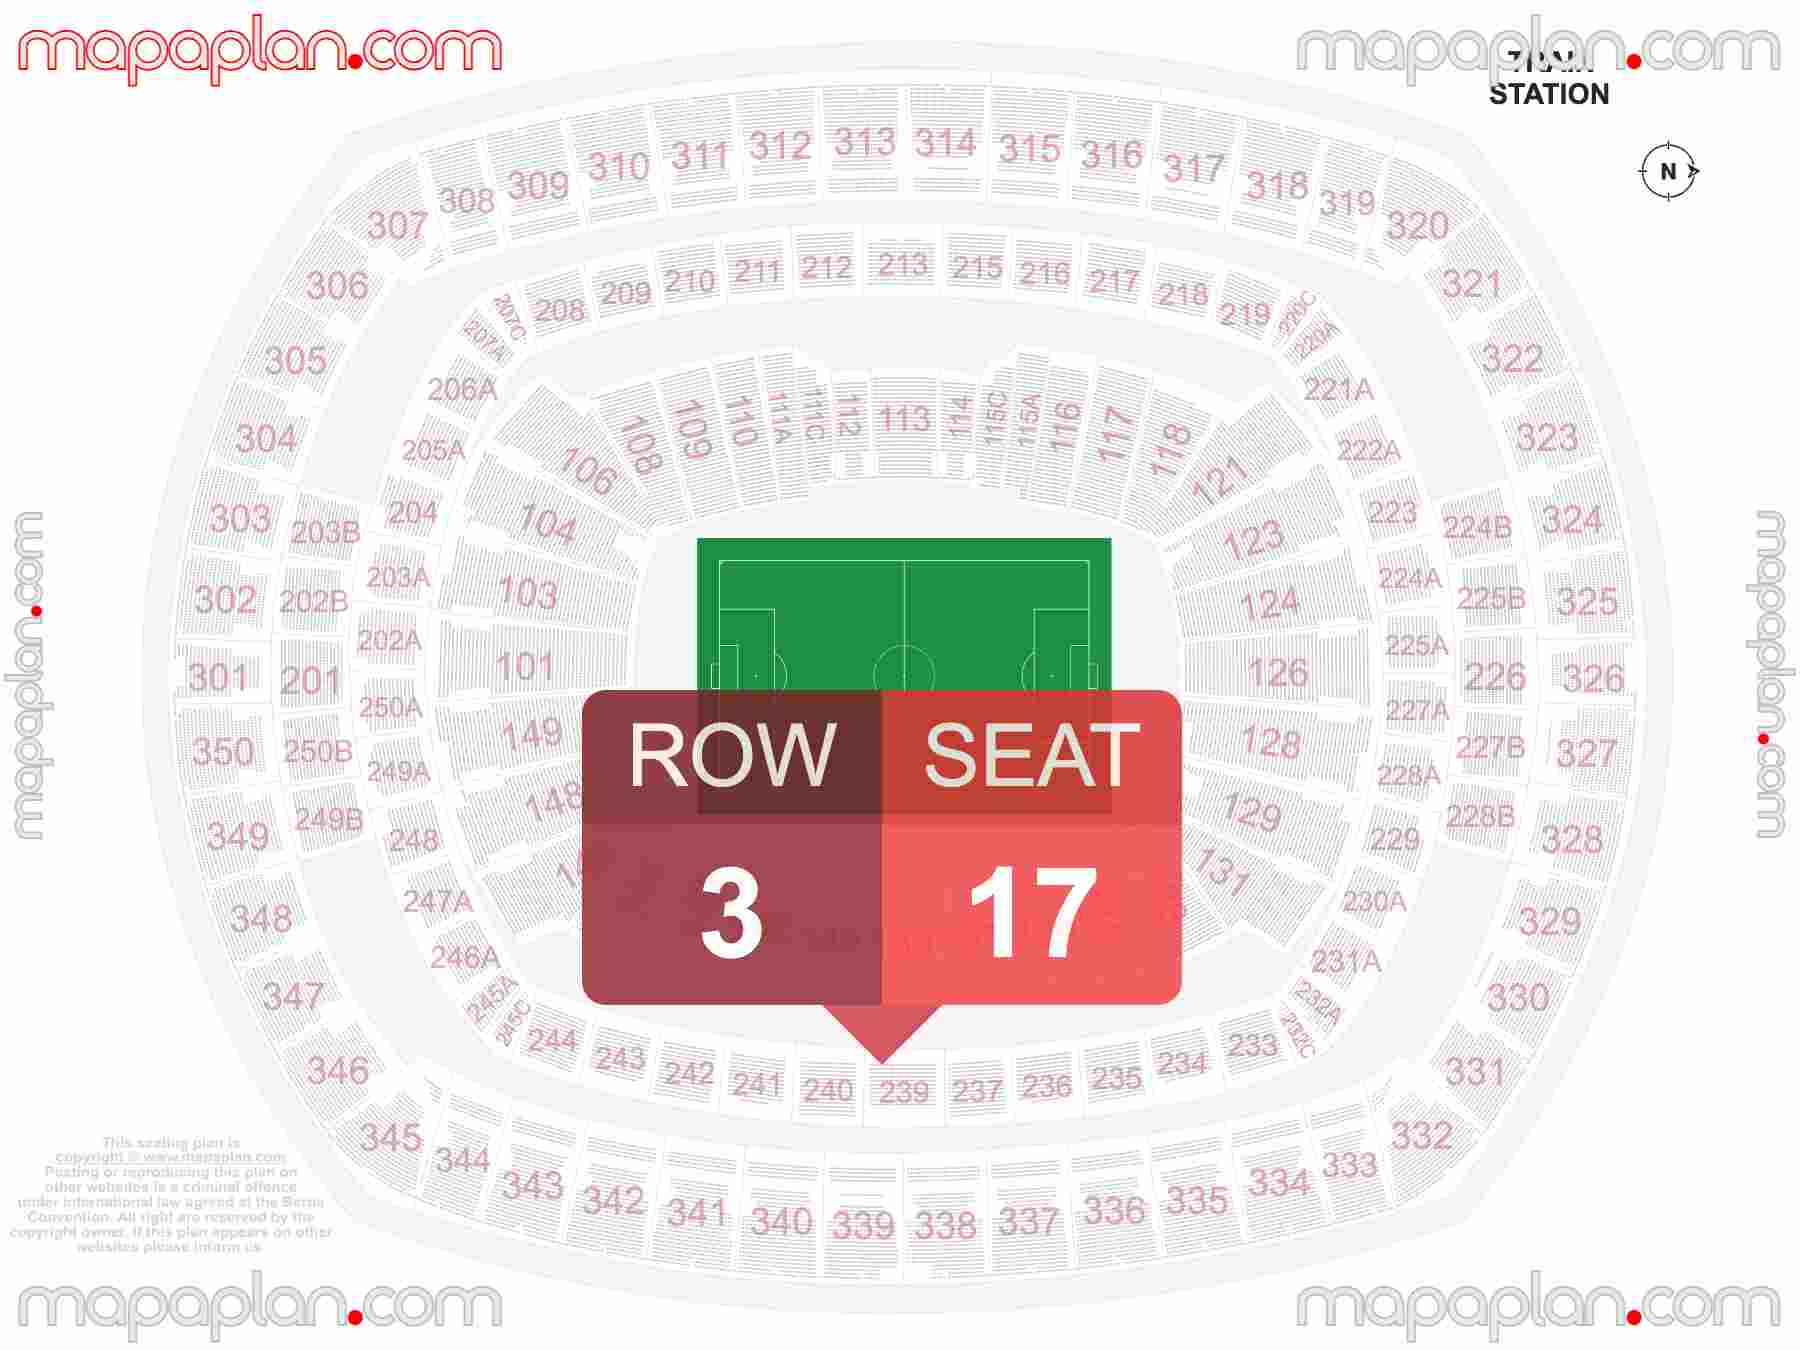 East Rutherford MetLife Stadium seating chart Soccer World Cup find best seats row numbering system plan showing how many seats per row - Individual 'find my seat' virtual locator